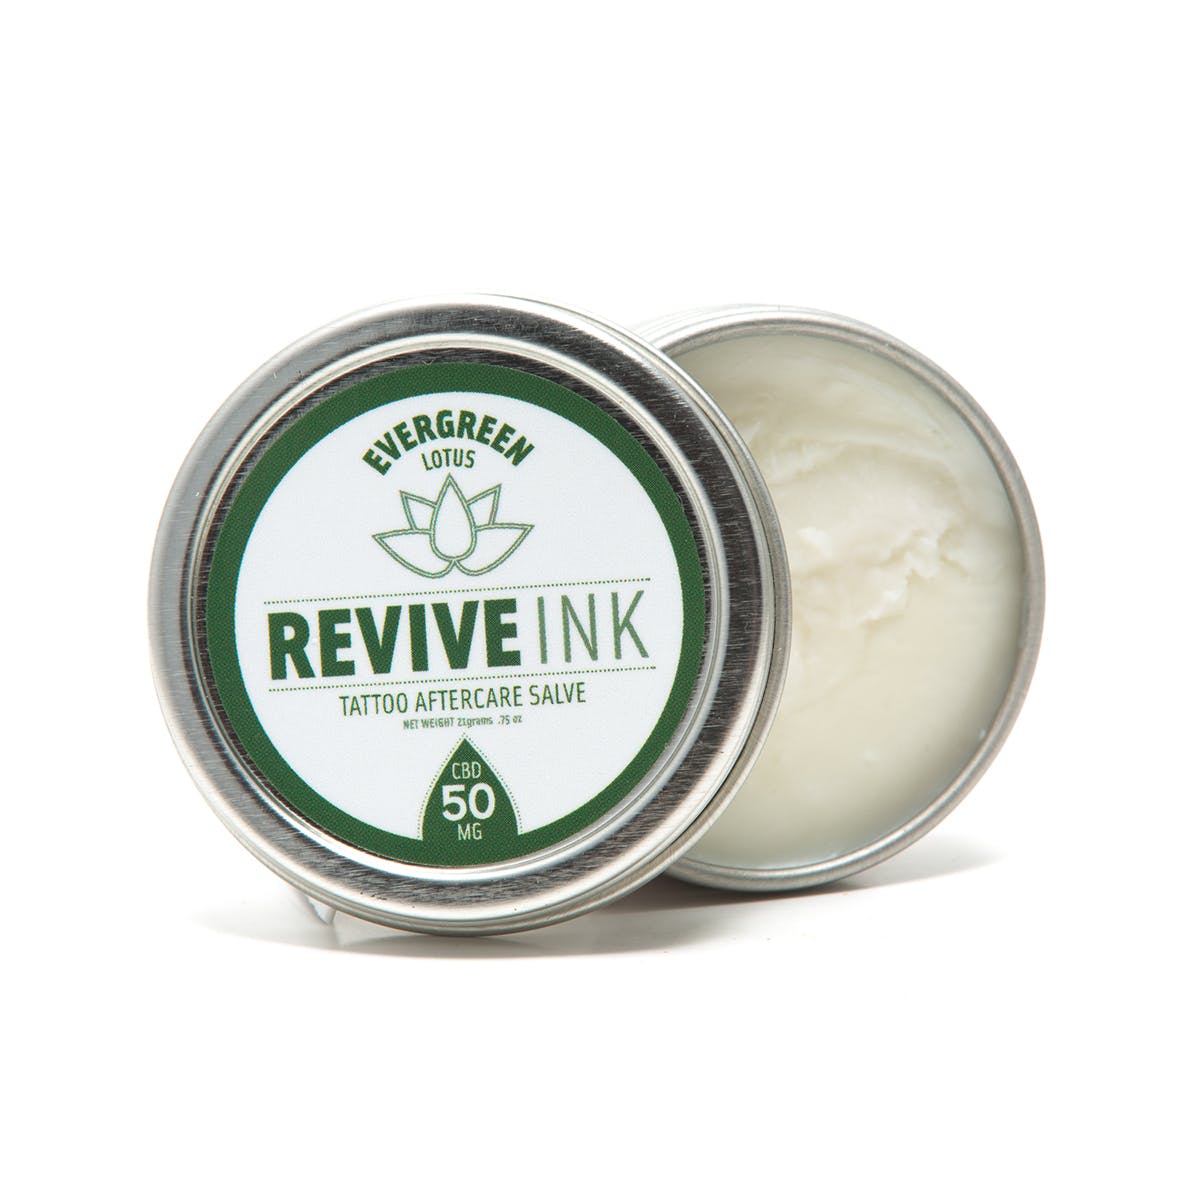 Revive Ink 50mg CBD Tattoo Aftercare Salve